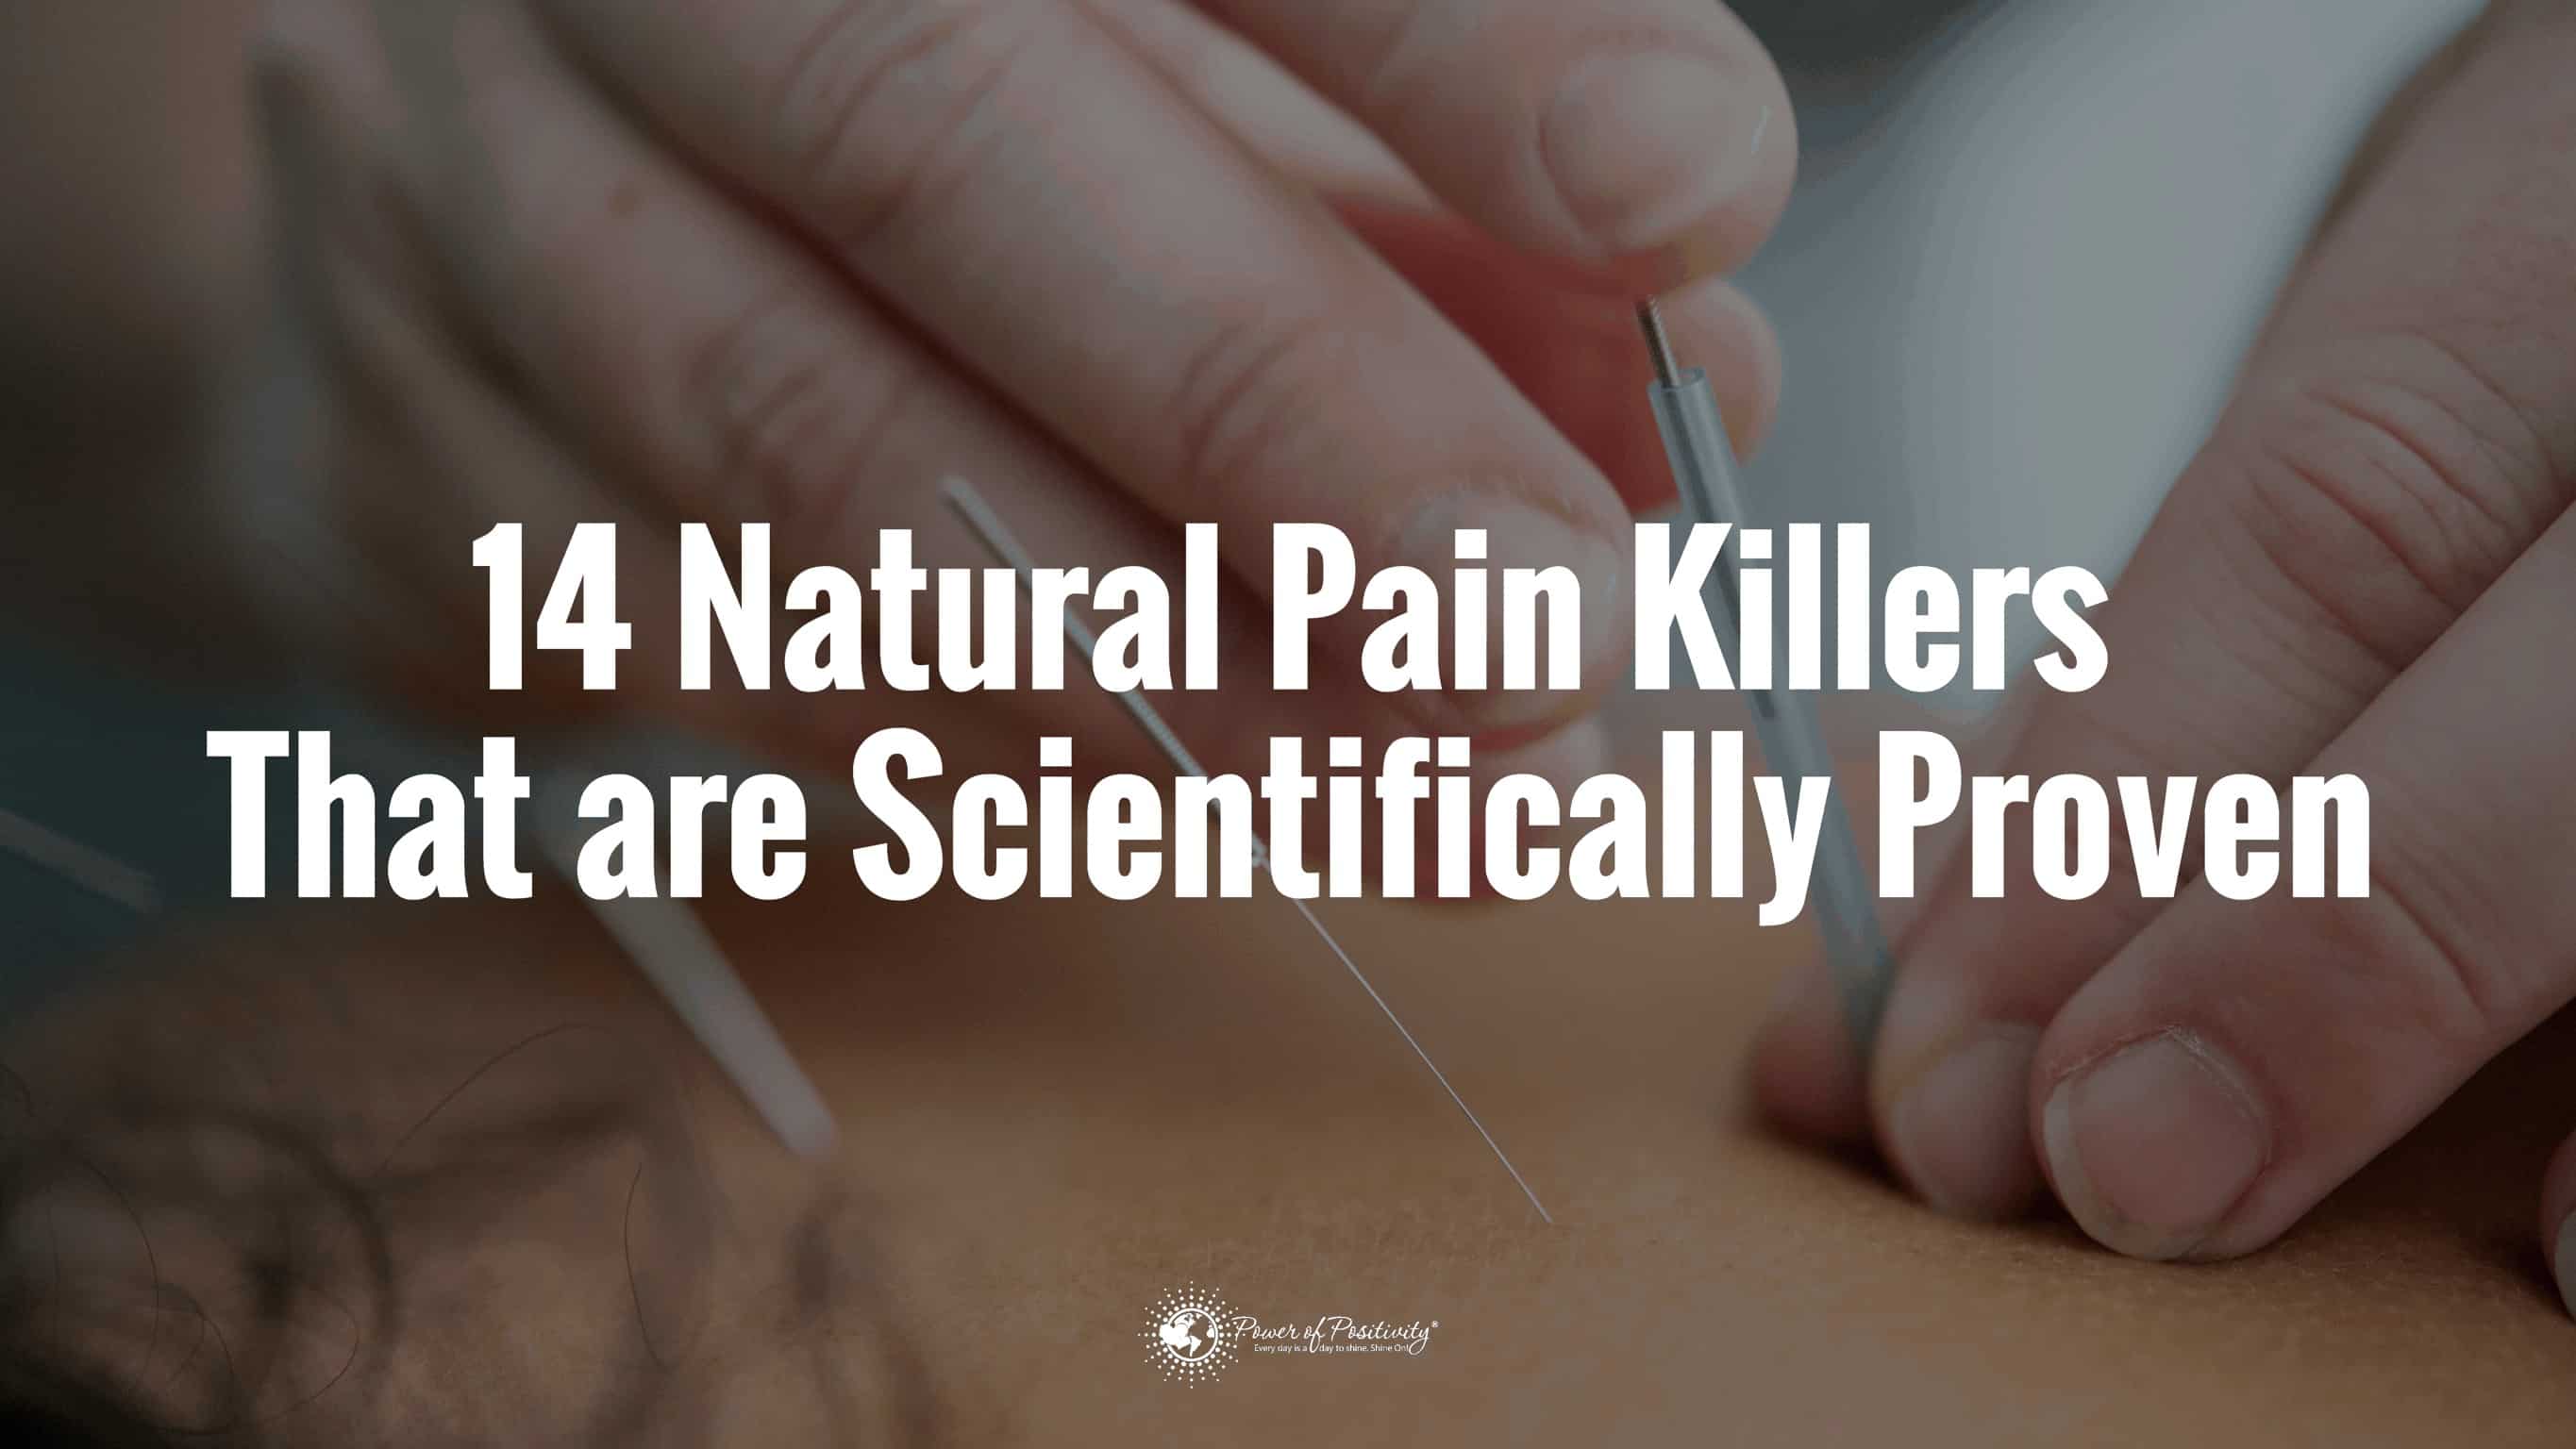 14 Natural Pain Killers That are Scientifically Proven